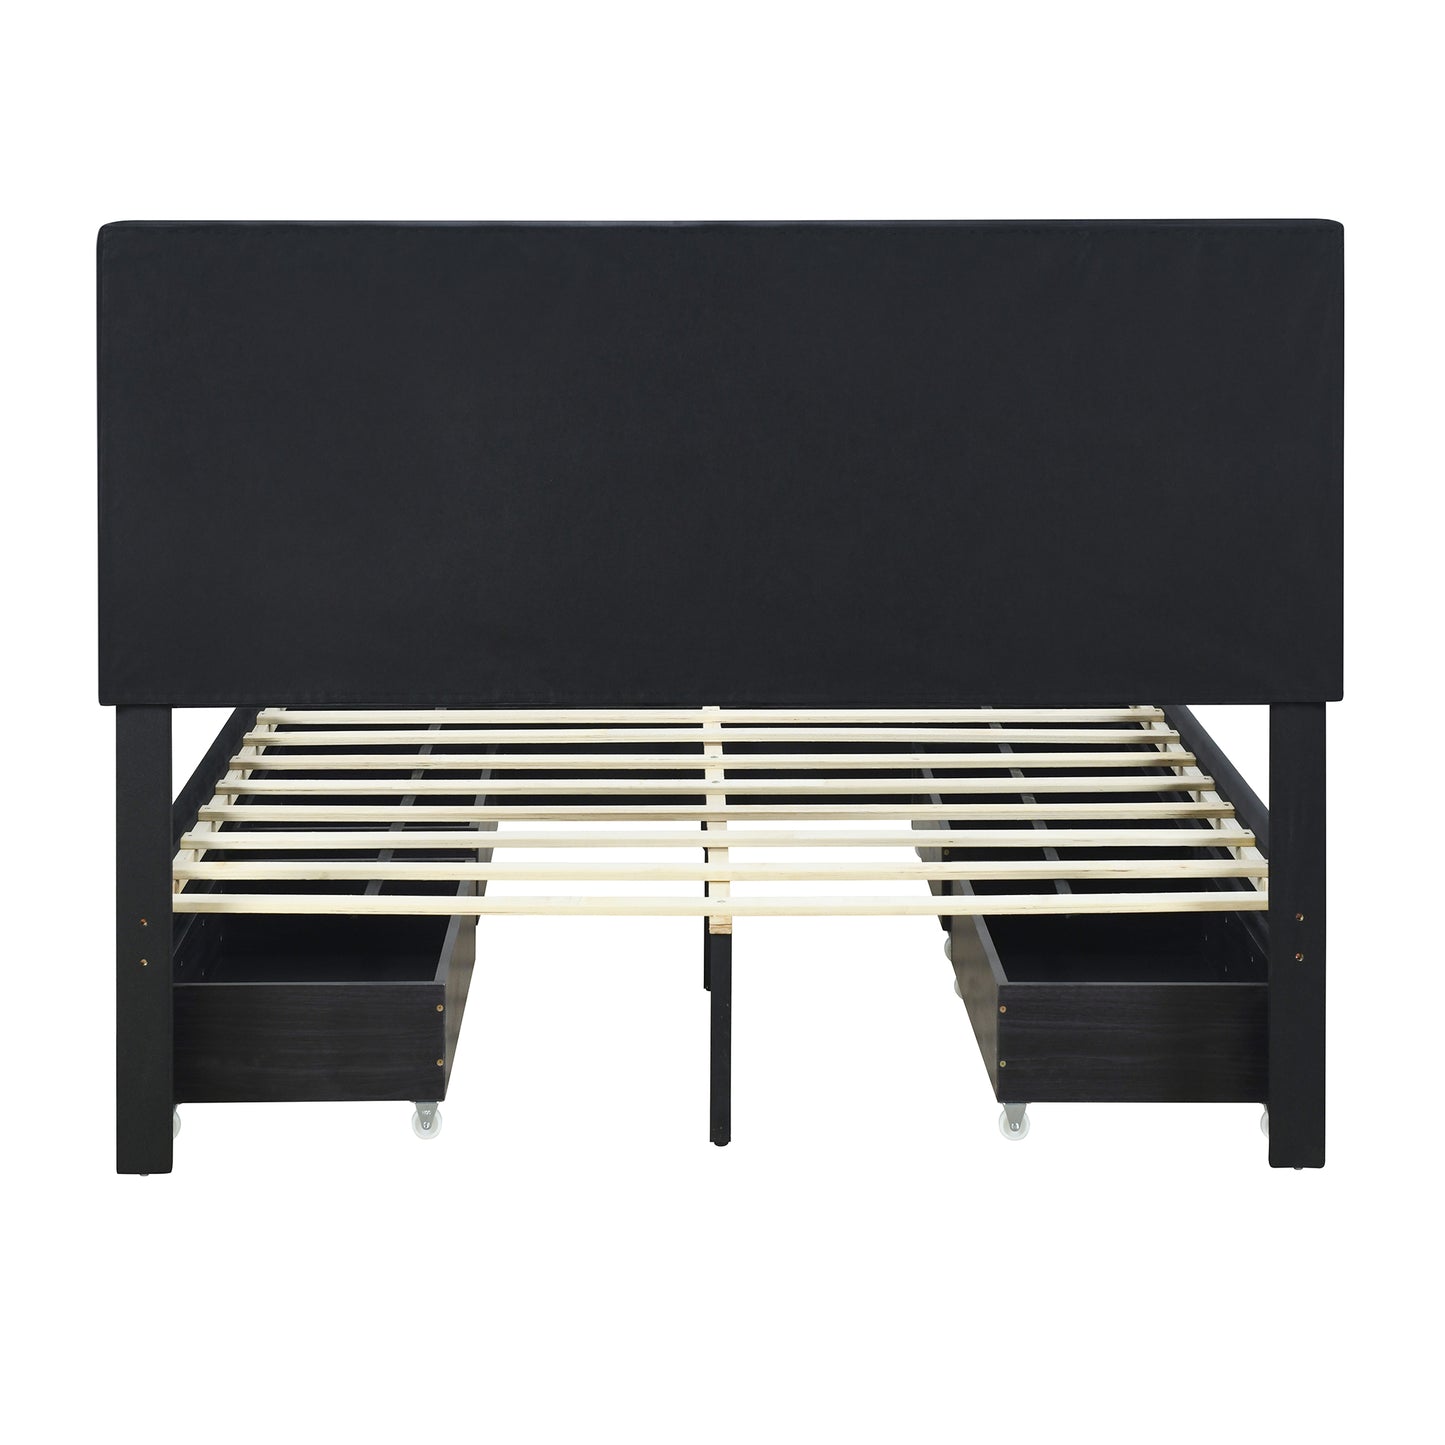 Queen Size Upholstered Platform Bed with Rivet-decorated Headboard, LED bed frame and 4 Drawers, Black